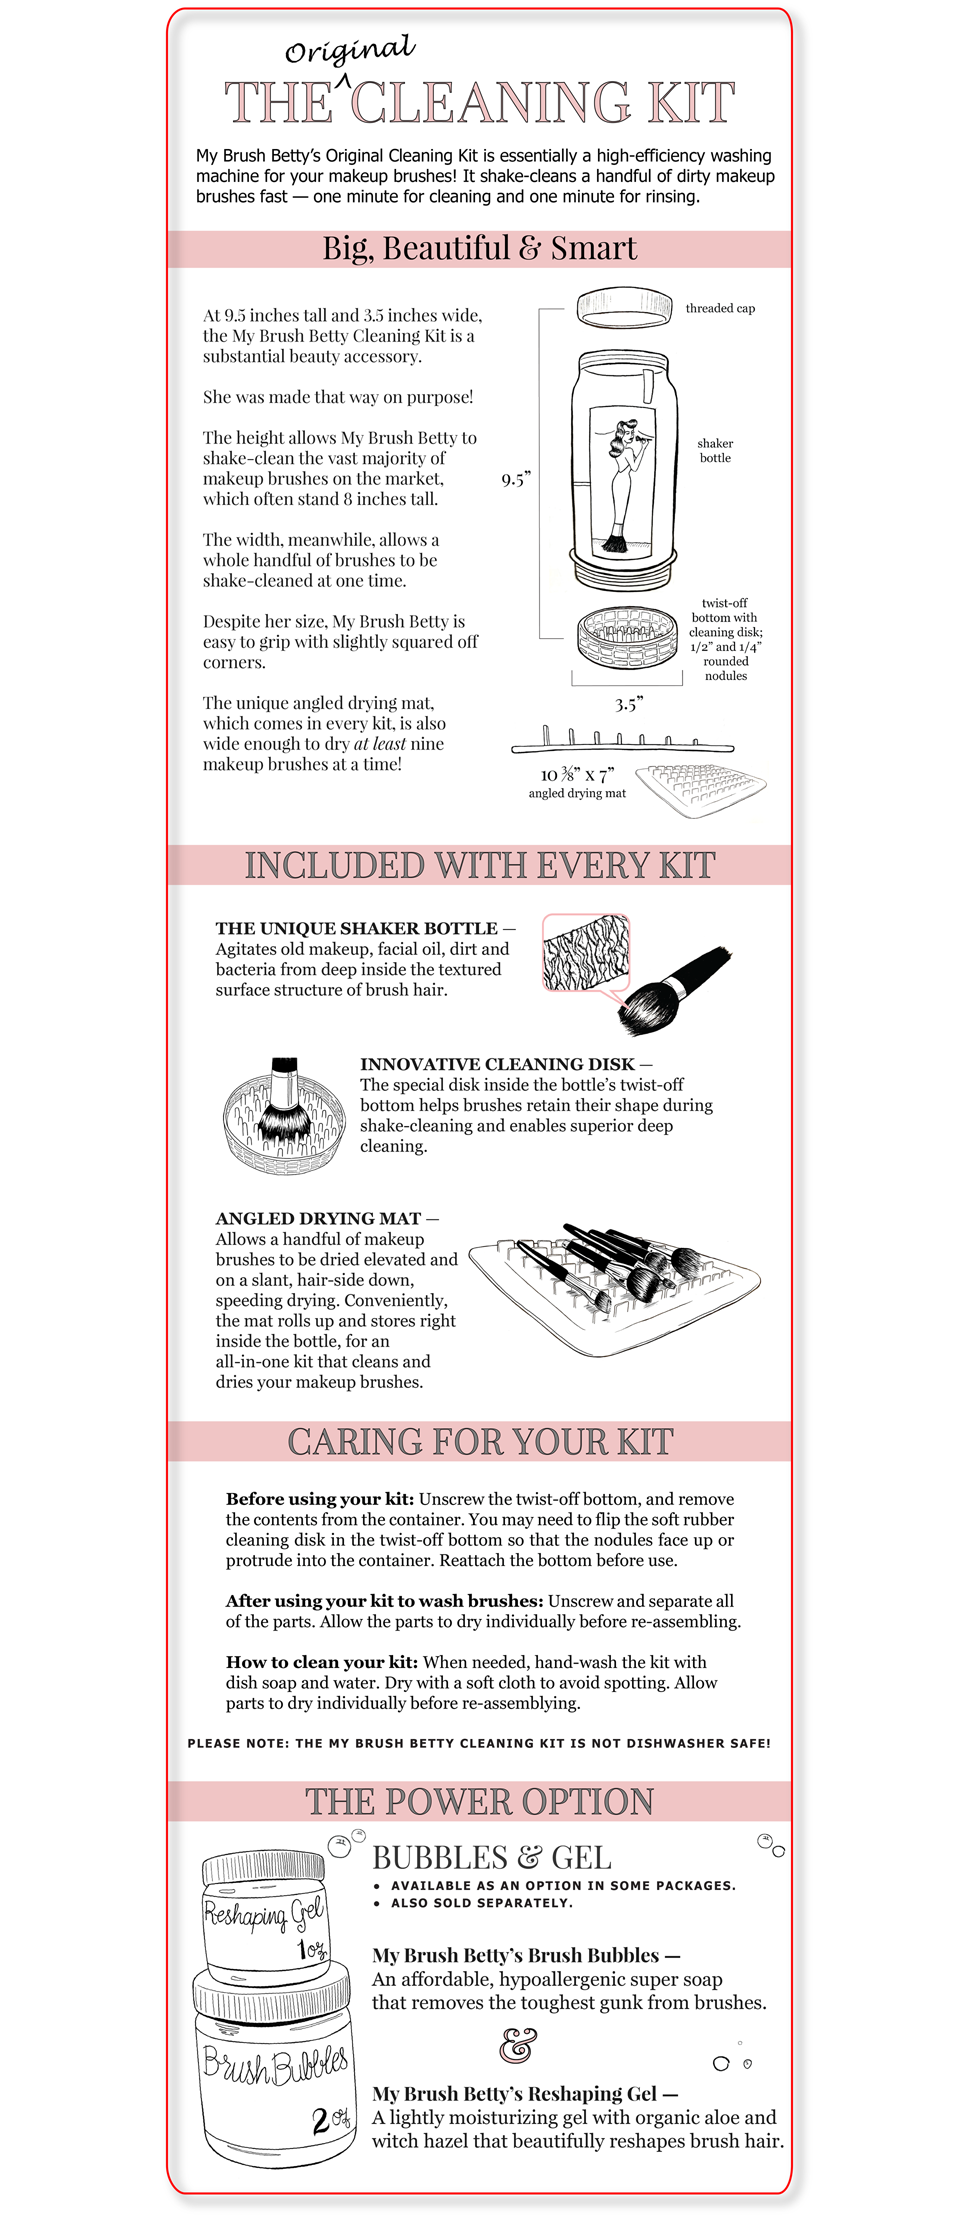 Details About My Brush Bettyt's Makeup Brush Cleaning Kit